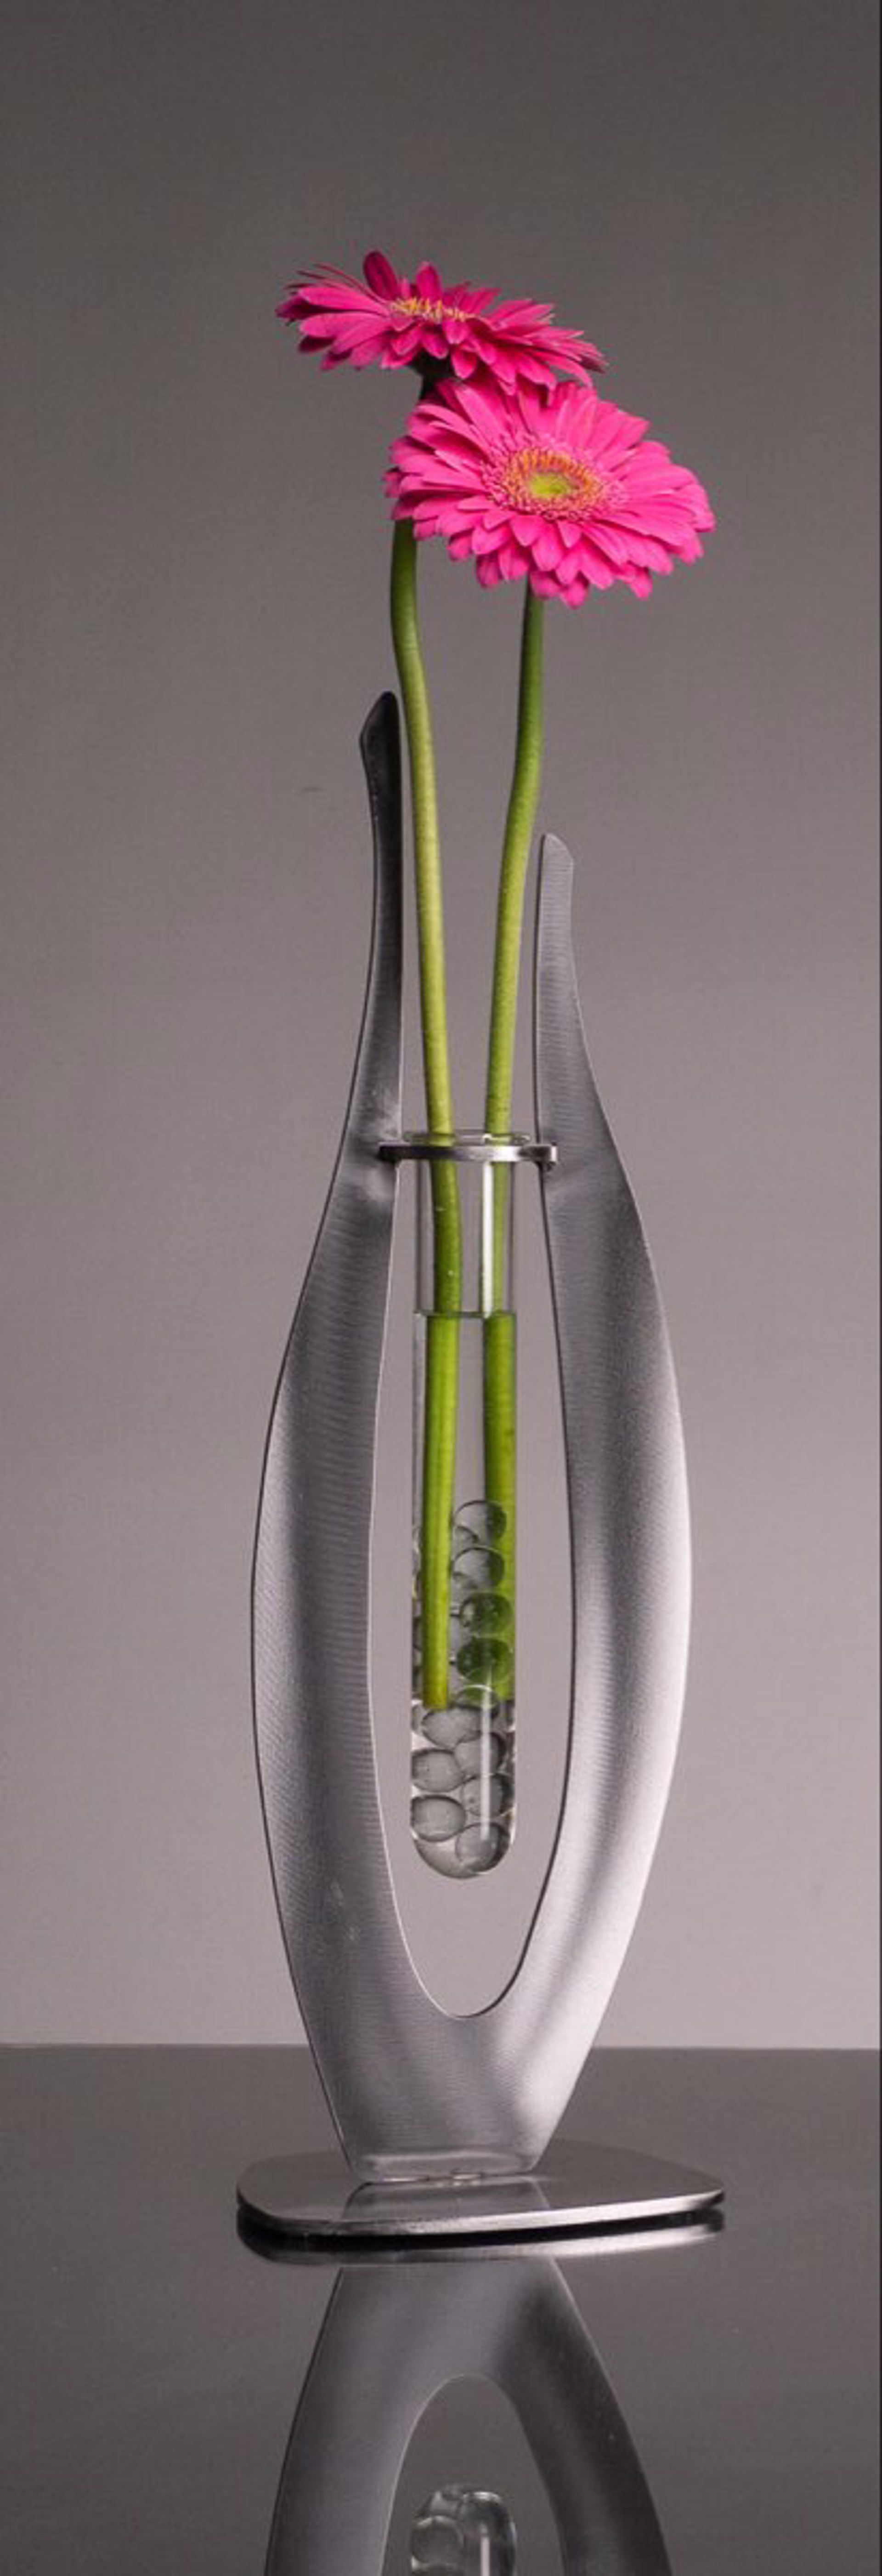 Silver Raindrop Vase or Candle Holder by Ken and Julie Girardini